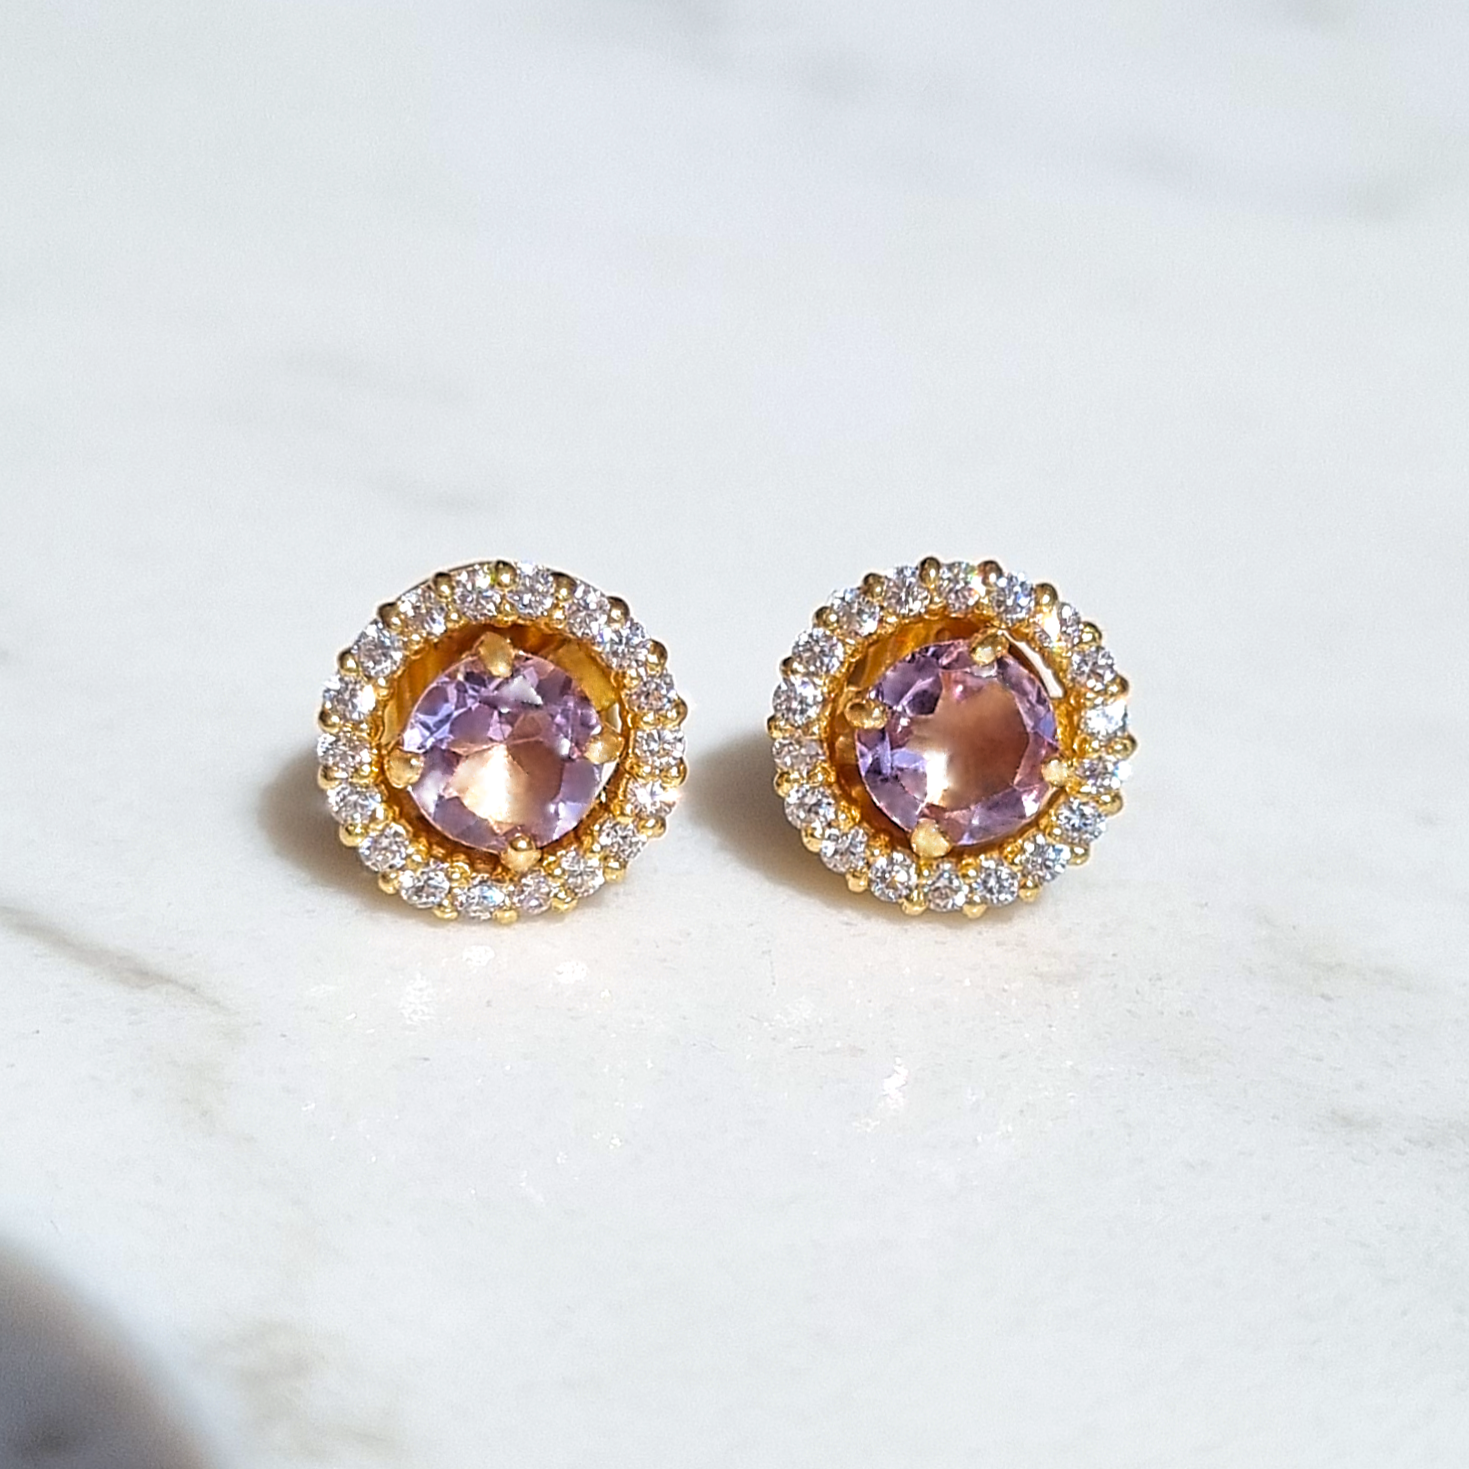 round cut lavender and diamond removable jackets earring in 18k gold vermeil.